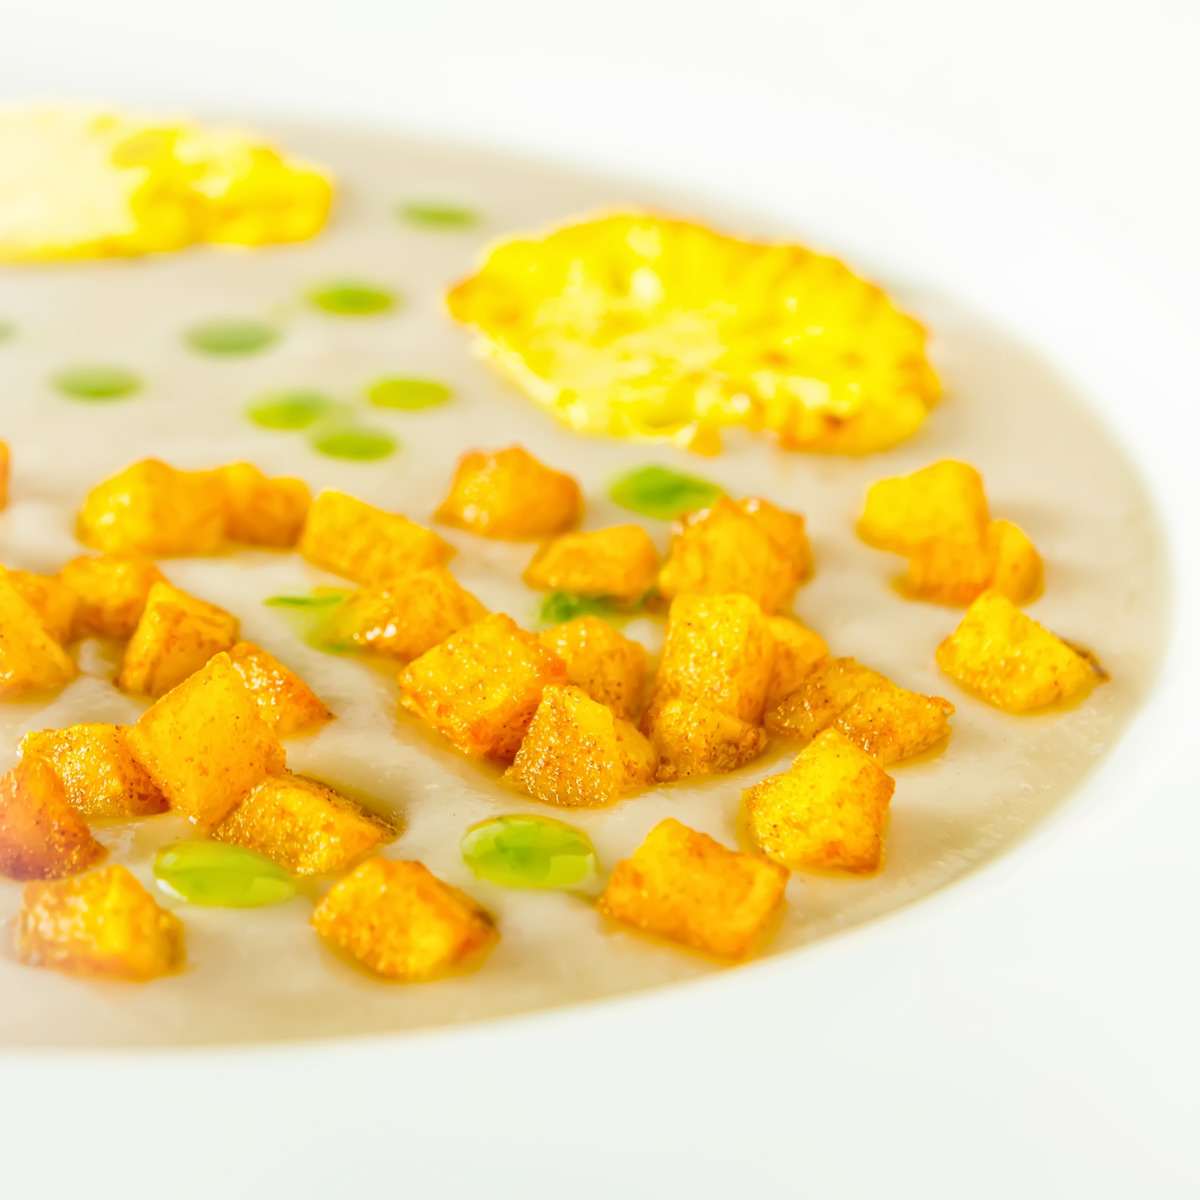 This delicious Cauliflower Veloute with Turmeric Potatoes is a soup that combines classic French techniques with Indian flavours.